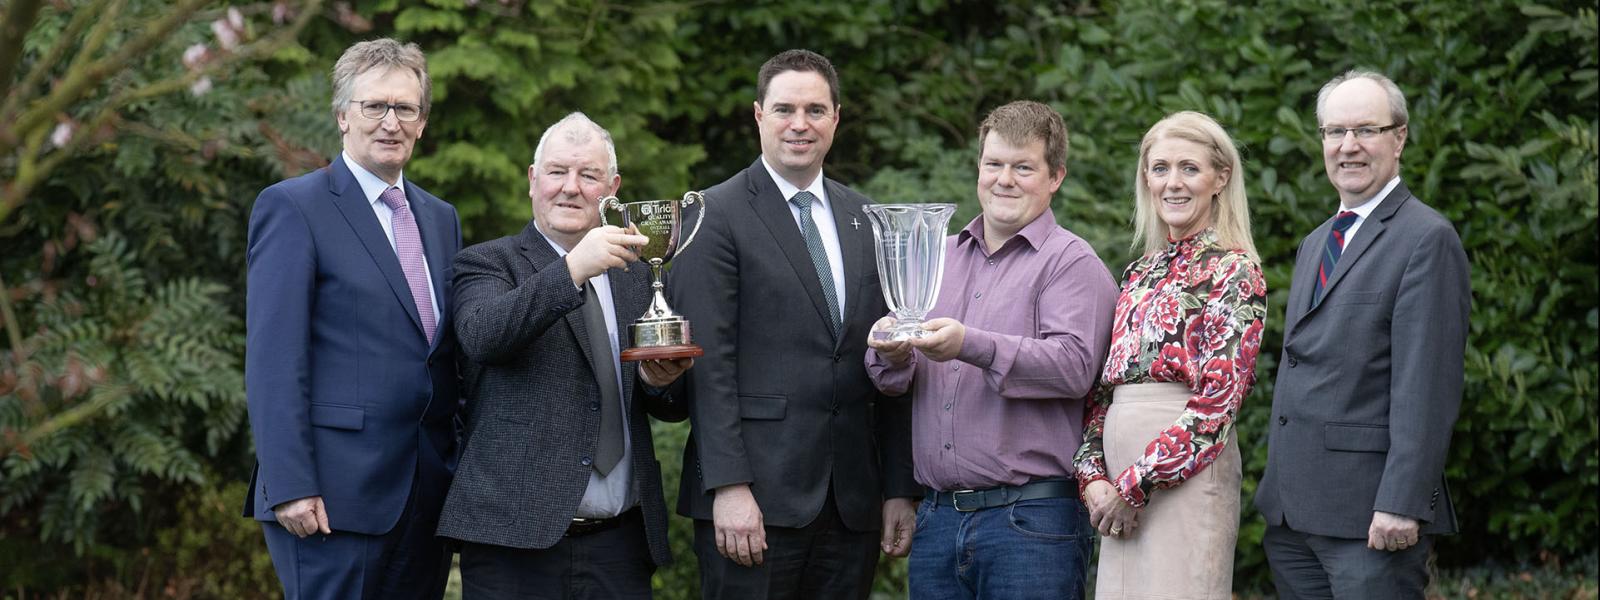 group of winners at tirlán grain awards